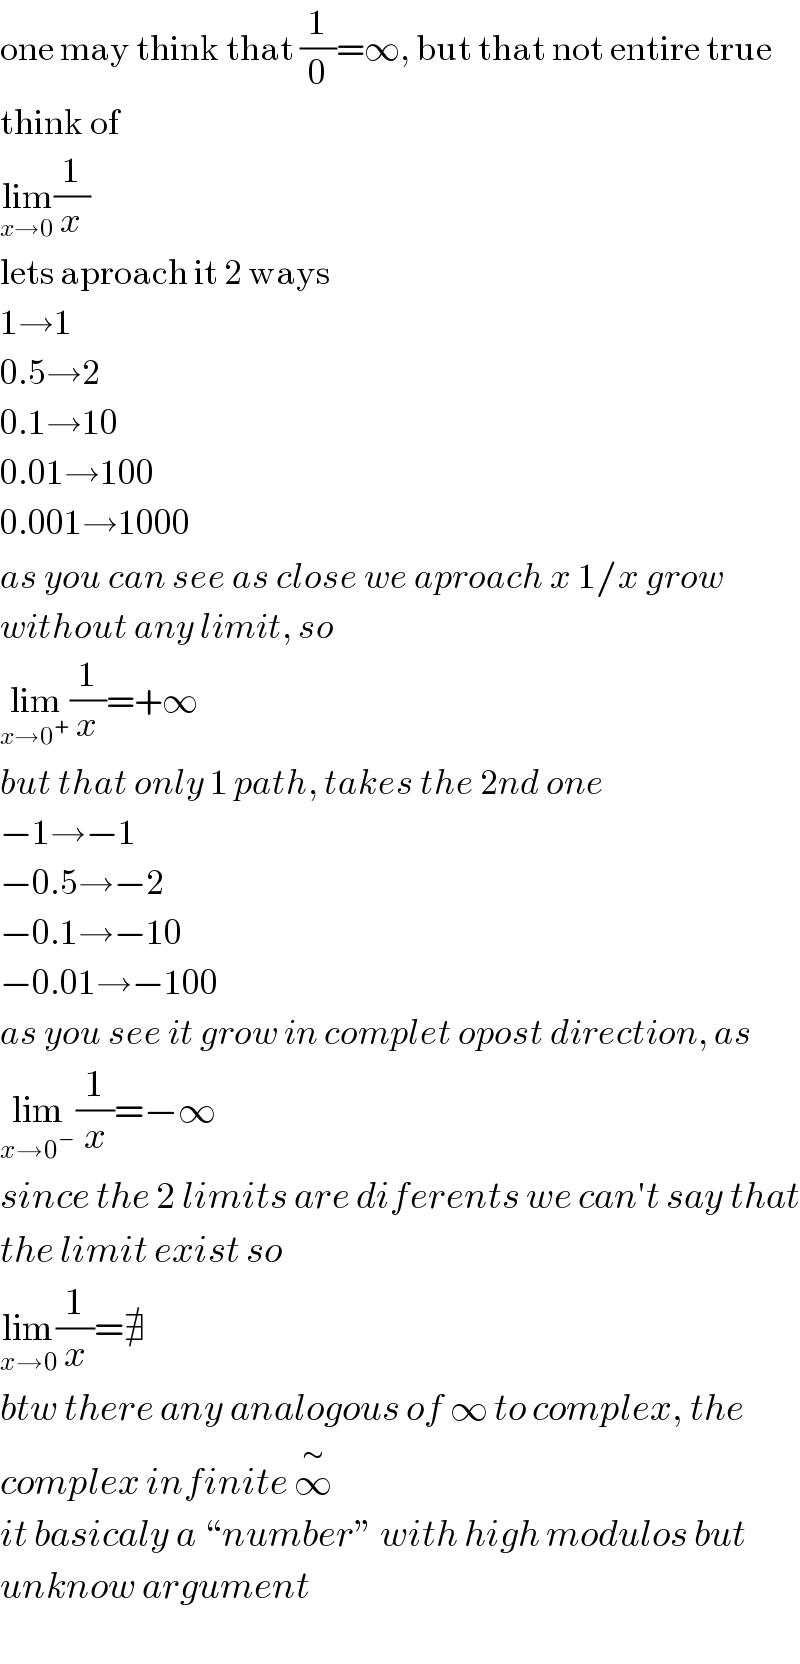 one may think that (1/0)=∞, but that not entire true  think of  lim_(x→0) (1/x)  lets aproach it 2 ways  1→1  0.5→2  0.1→10  0.01→100  0.001→1000  as you can see as close we aproach x 1/x grow  without any limit, so  lim_(x→0^+ ) (1/x)=+∞   but that only 1 path, takes the 2nd one  −1→−1  −0.5→−2  −0.1→−10  −0.01→−100  as you see it grow in complet opost direction, as  lim_(x→0^− ) (1/x)=−∞  since the 2 limits are diferents we can′t say that  the limit exist so  lim_(x→0) (1/x)=∄  btw there any analogous of ∞ to complex, the  complex infinite ∞^∼   it basicaly a “number” with high modulos but  unknow argument  